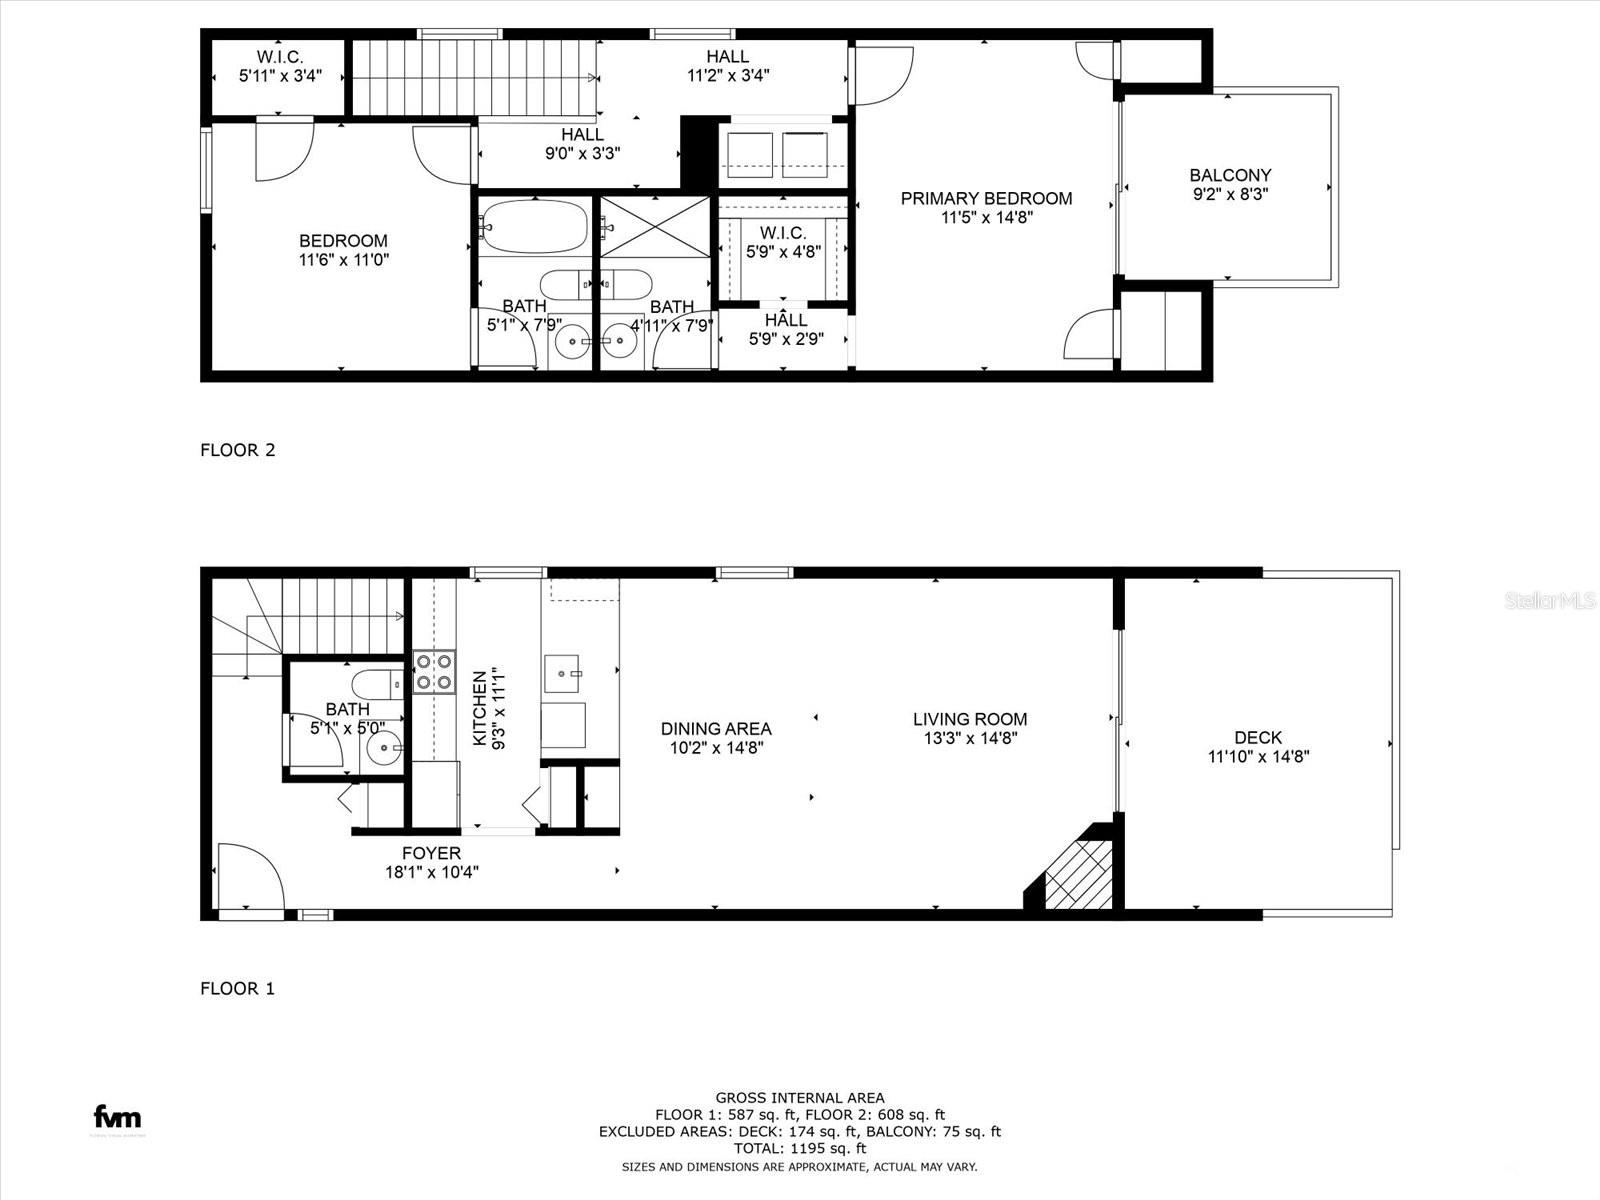 Level 1 and 2 floor plan